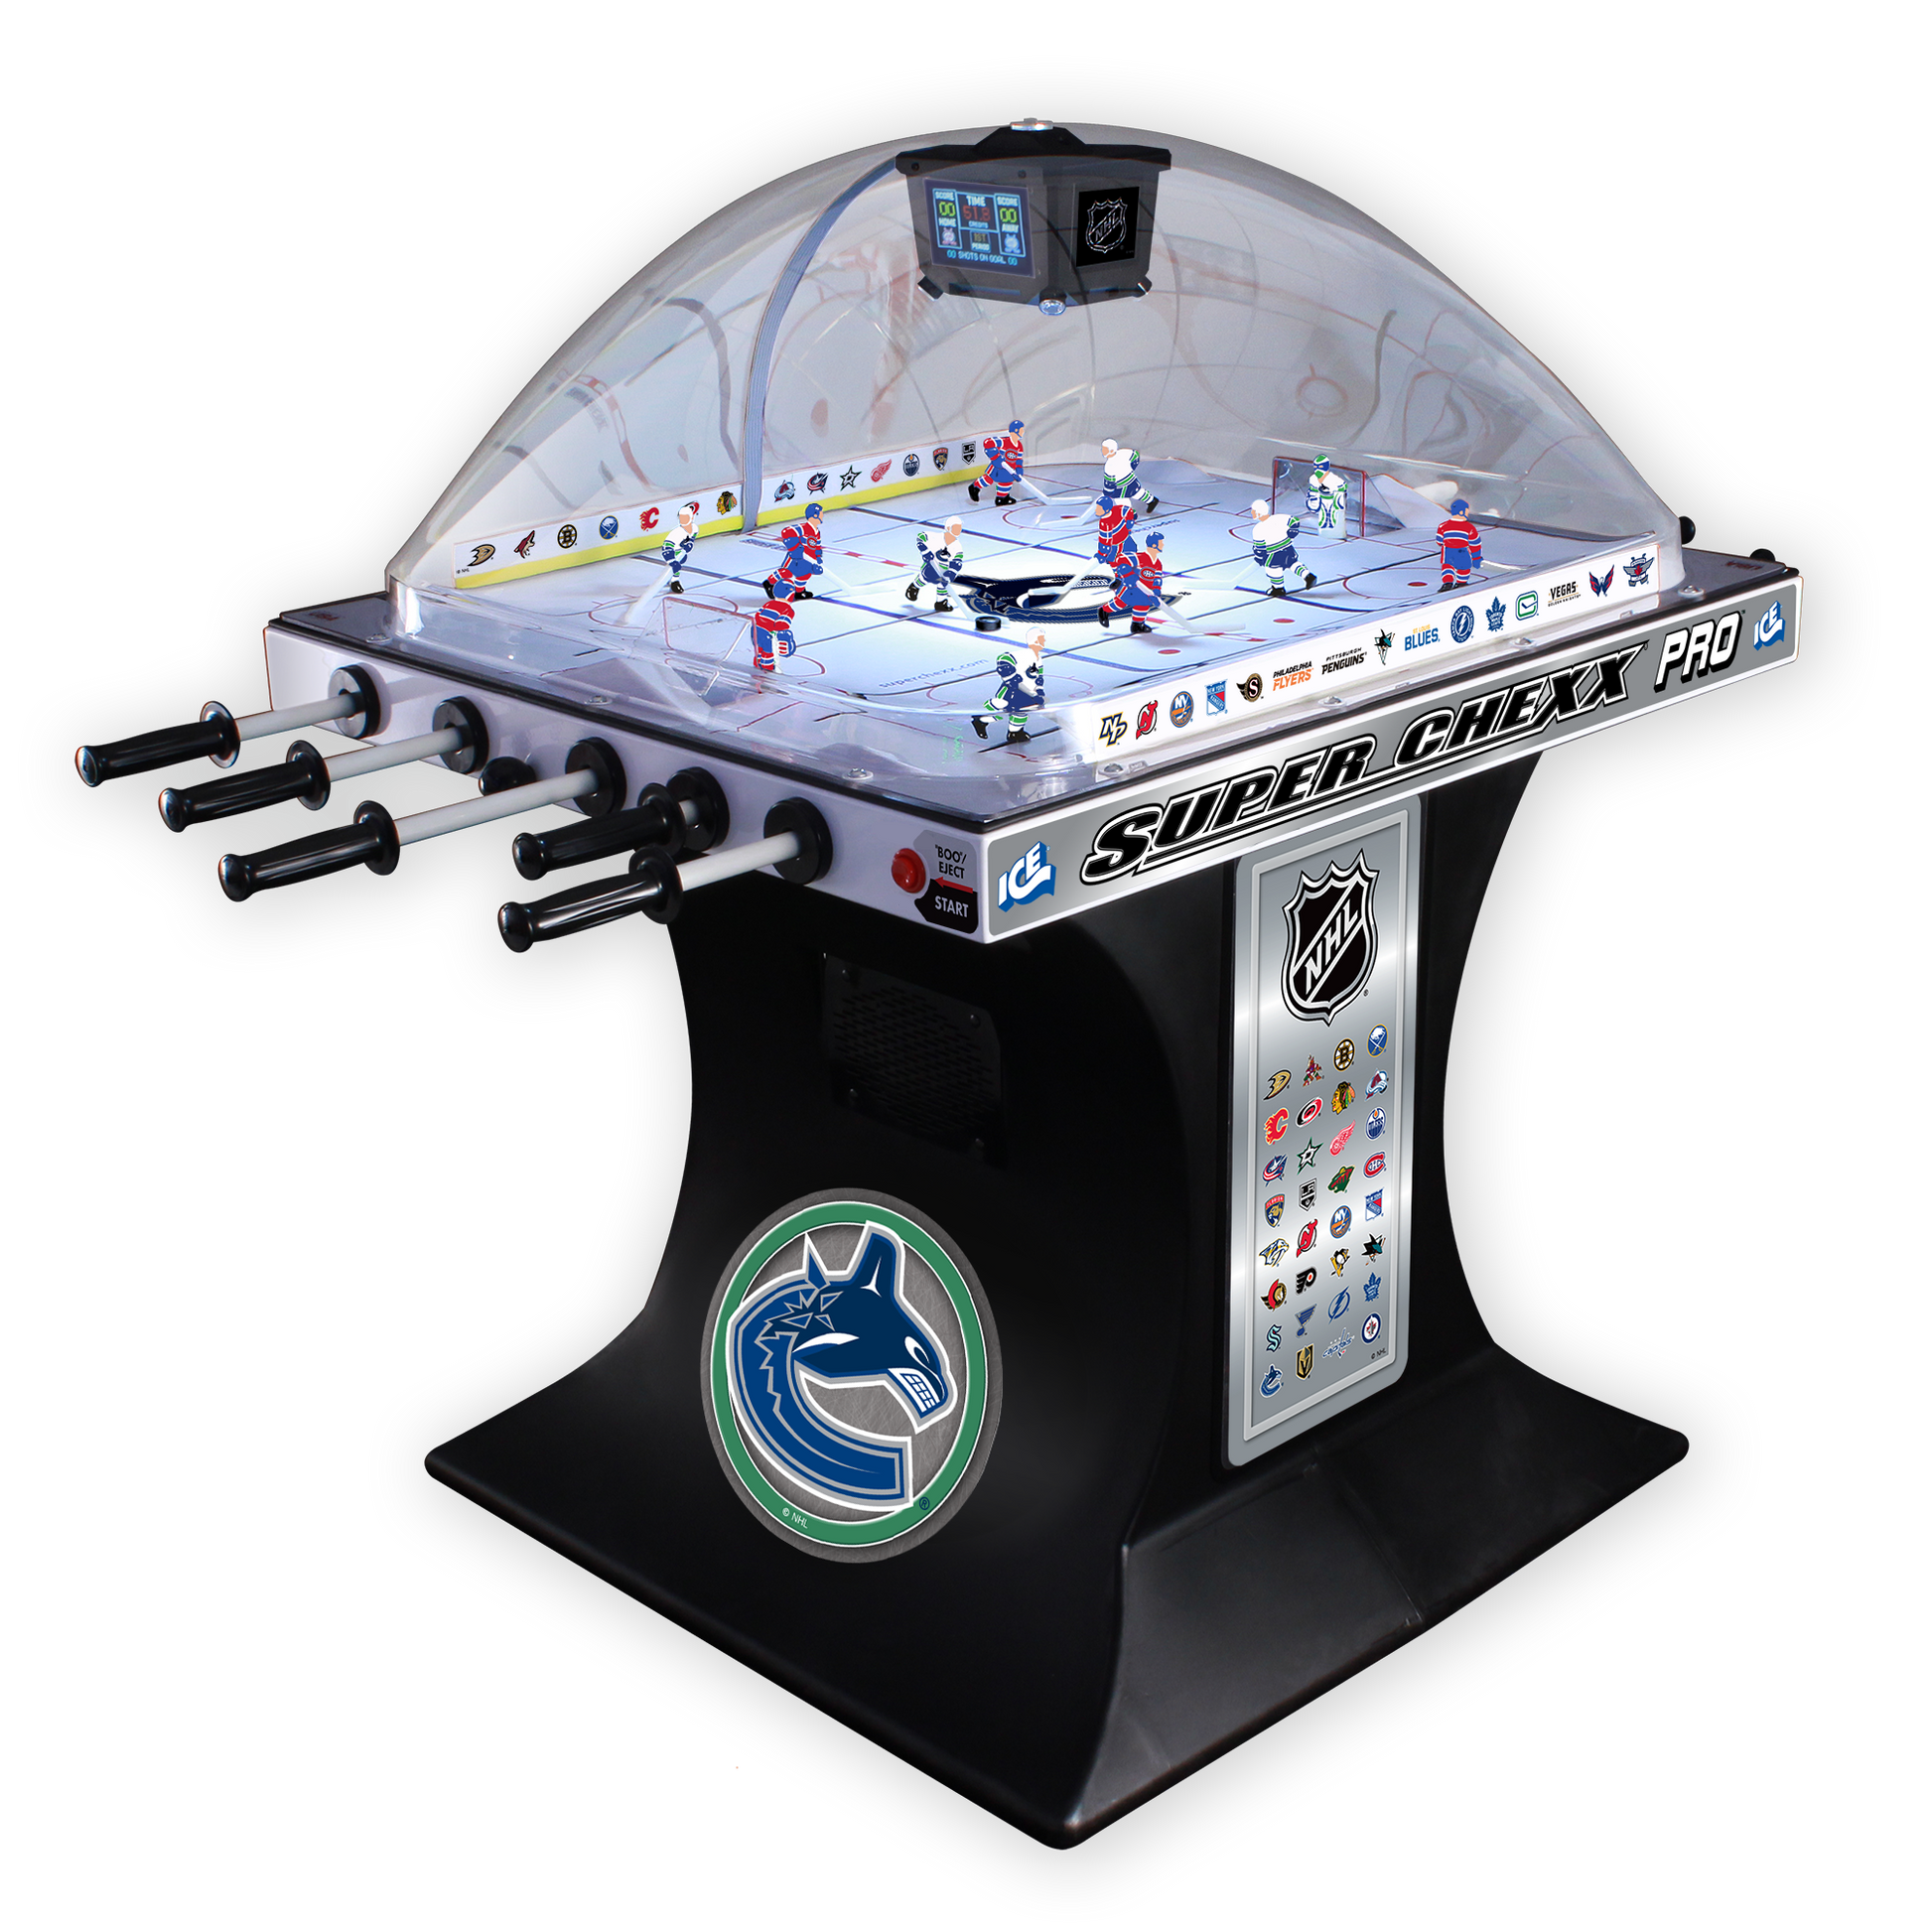 Vancouver Canucks NHL Super Chexx Pro Bubble Hockey Arcade Innovative Concepts in Entertainment   